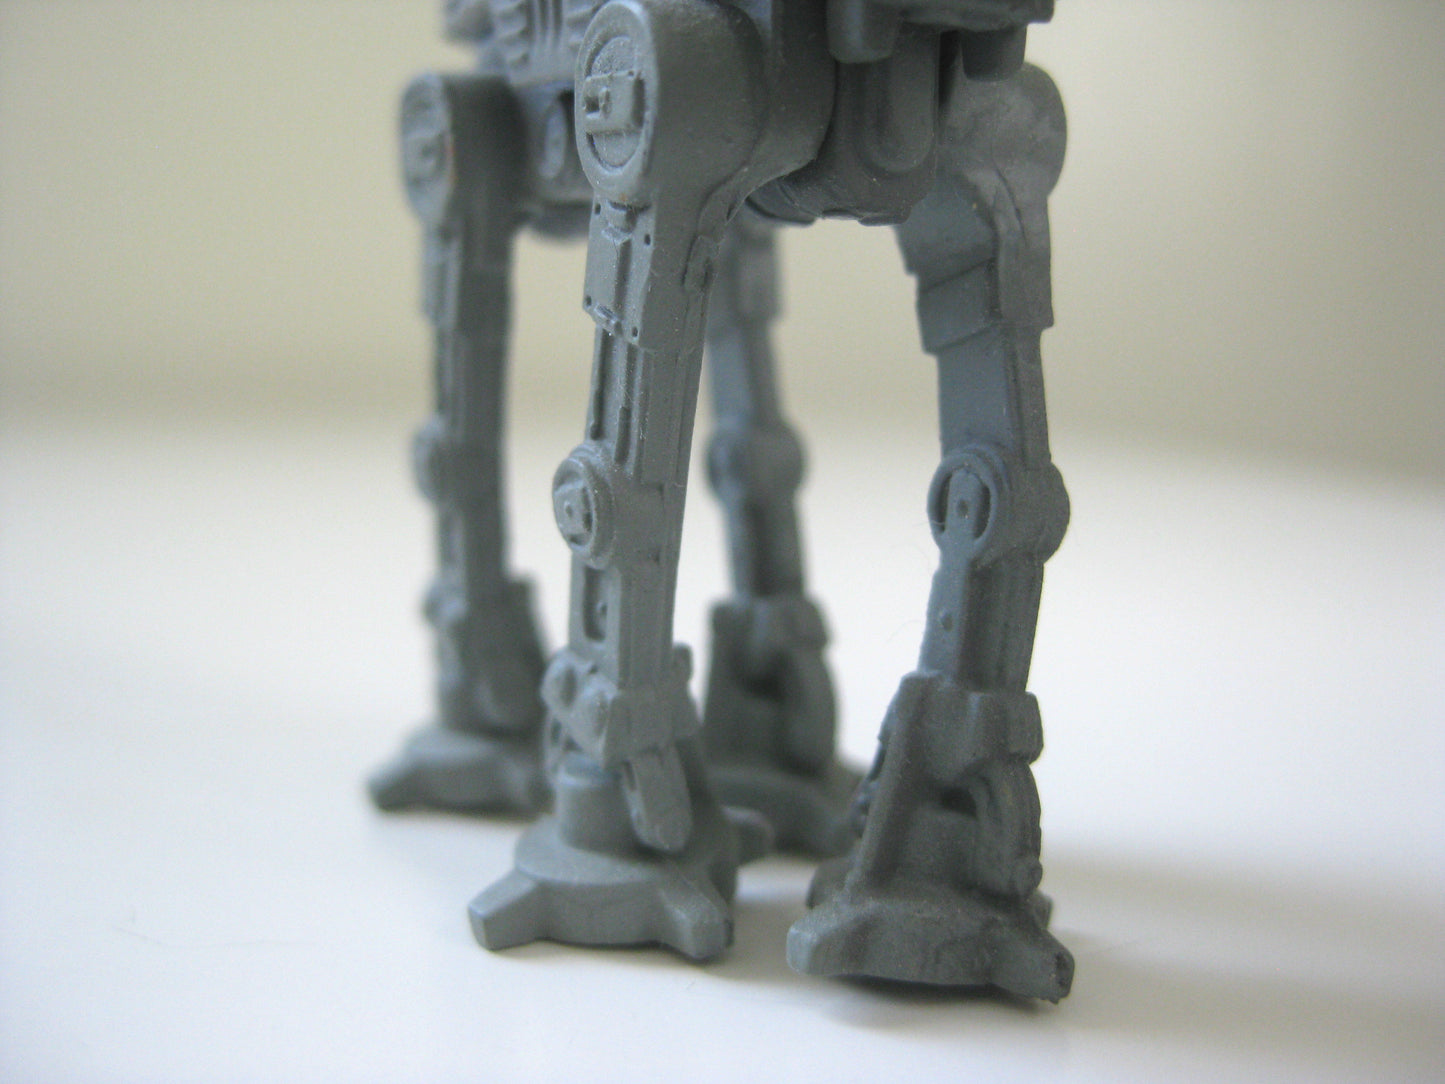 Back legs of the Star Wars AT-AT small scale toy model.